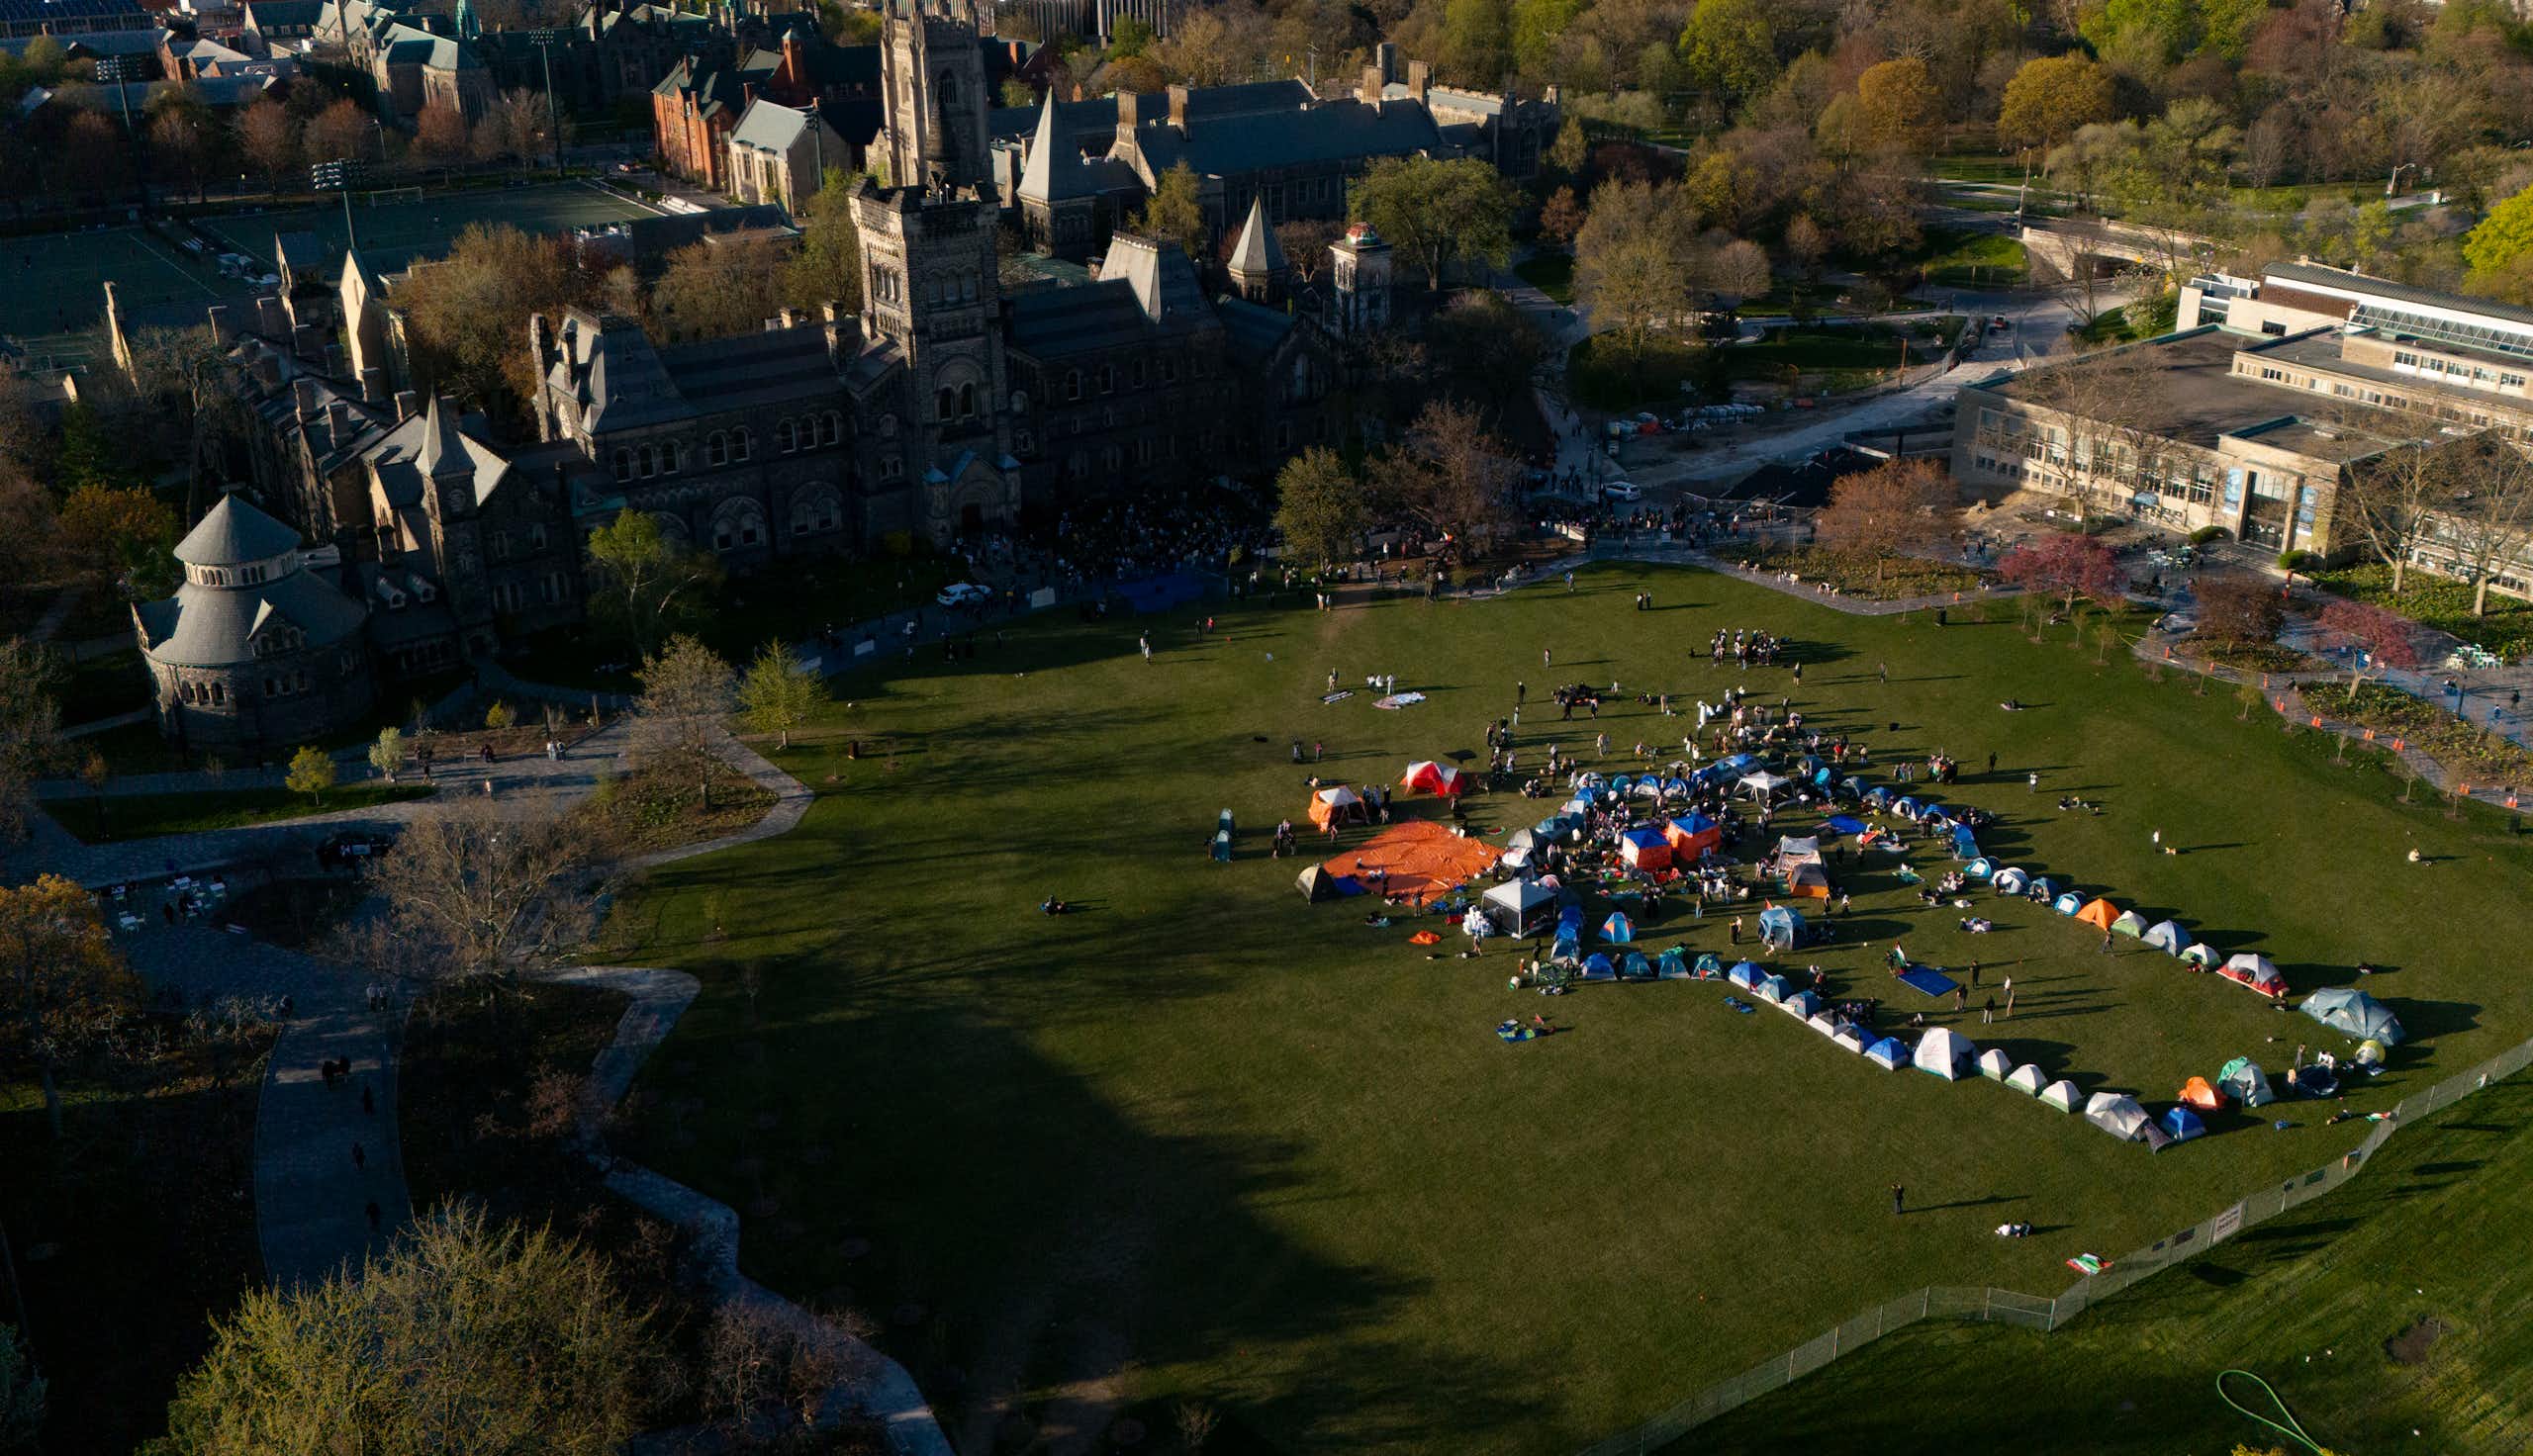 An aerial view shows an encampment on a grassy area with university buildings surrounding it.